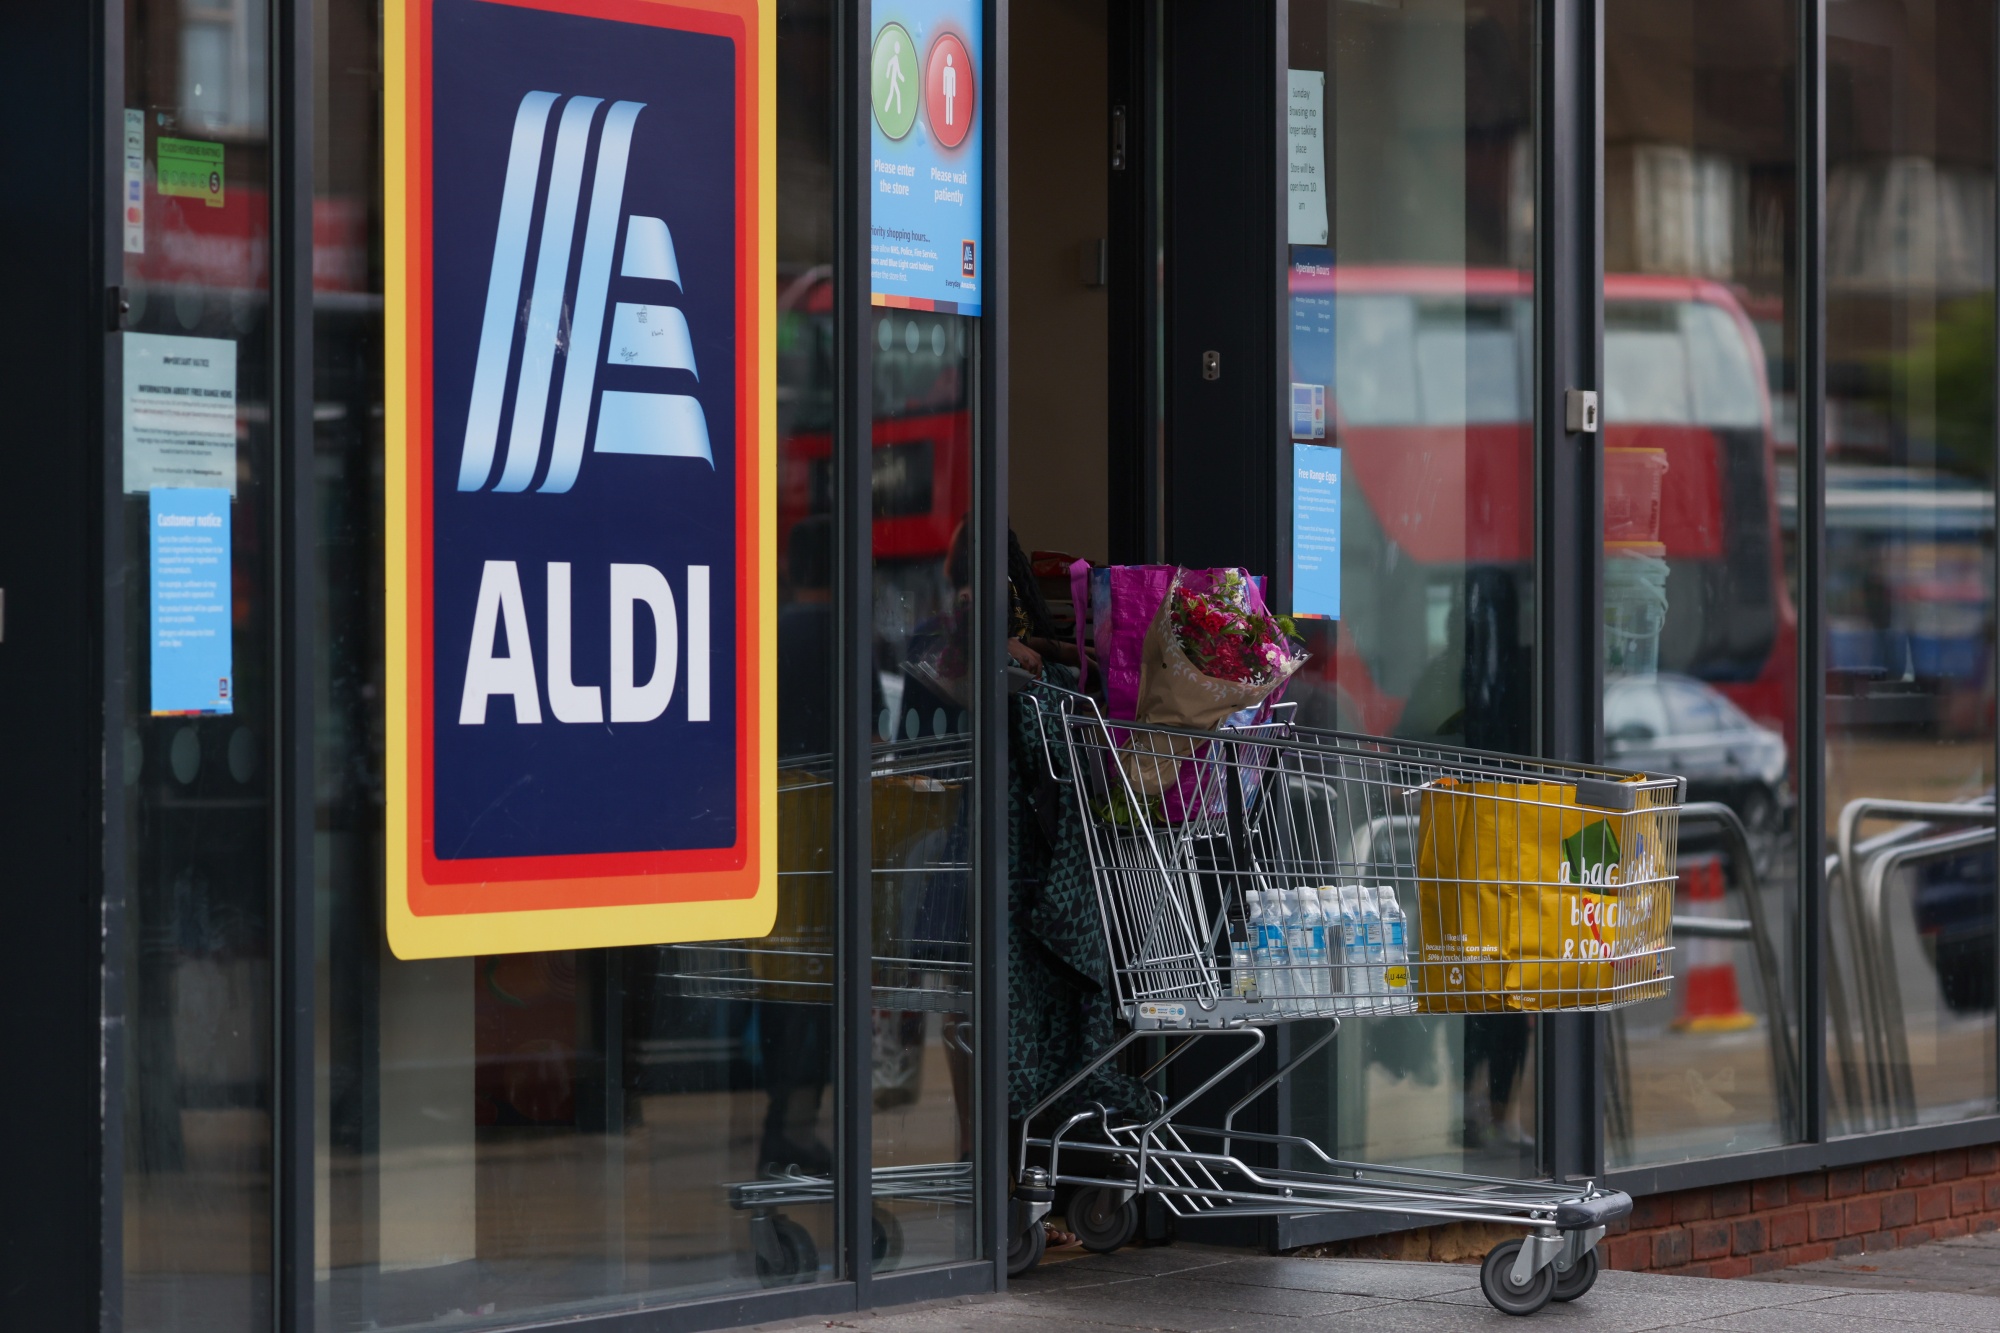 Study: Lidl store openings bite into competitors' sales